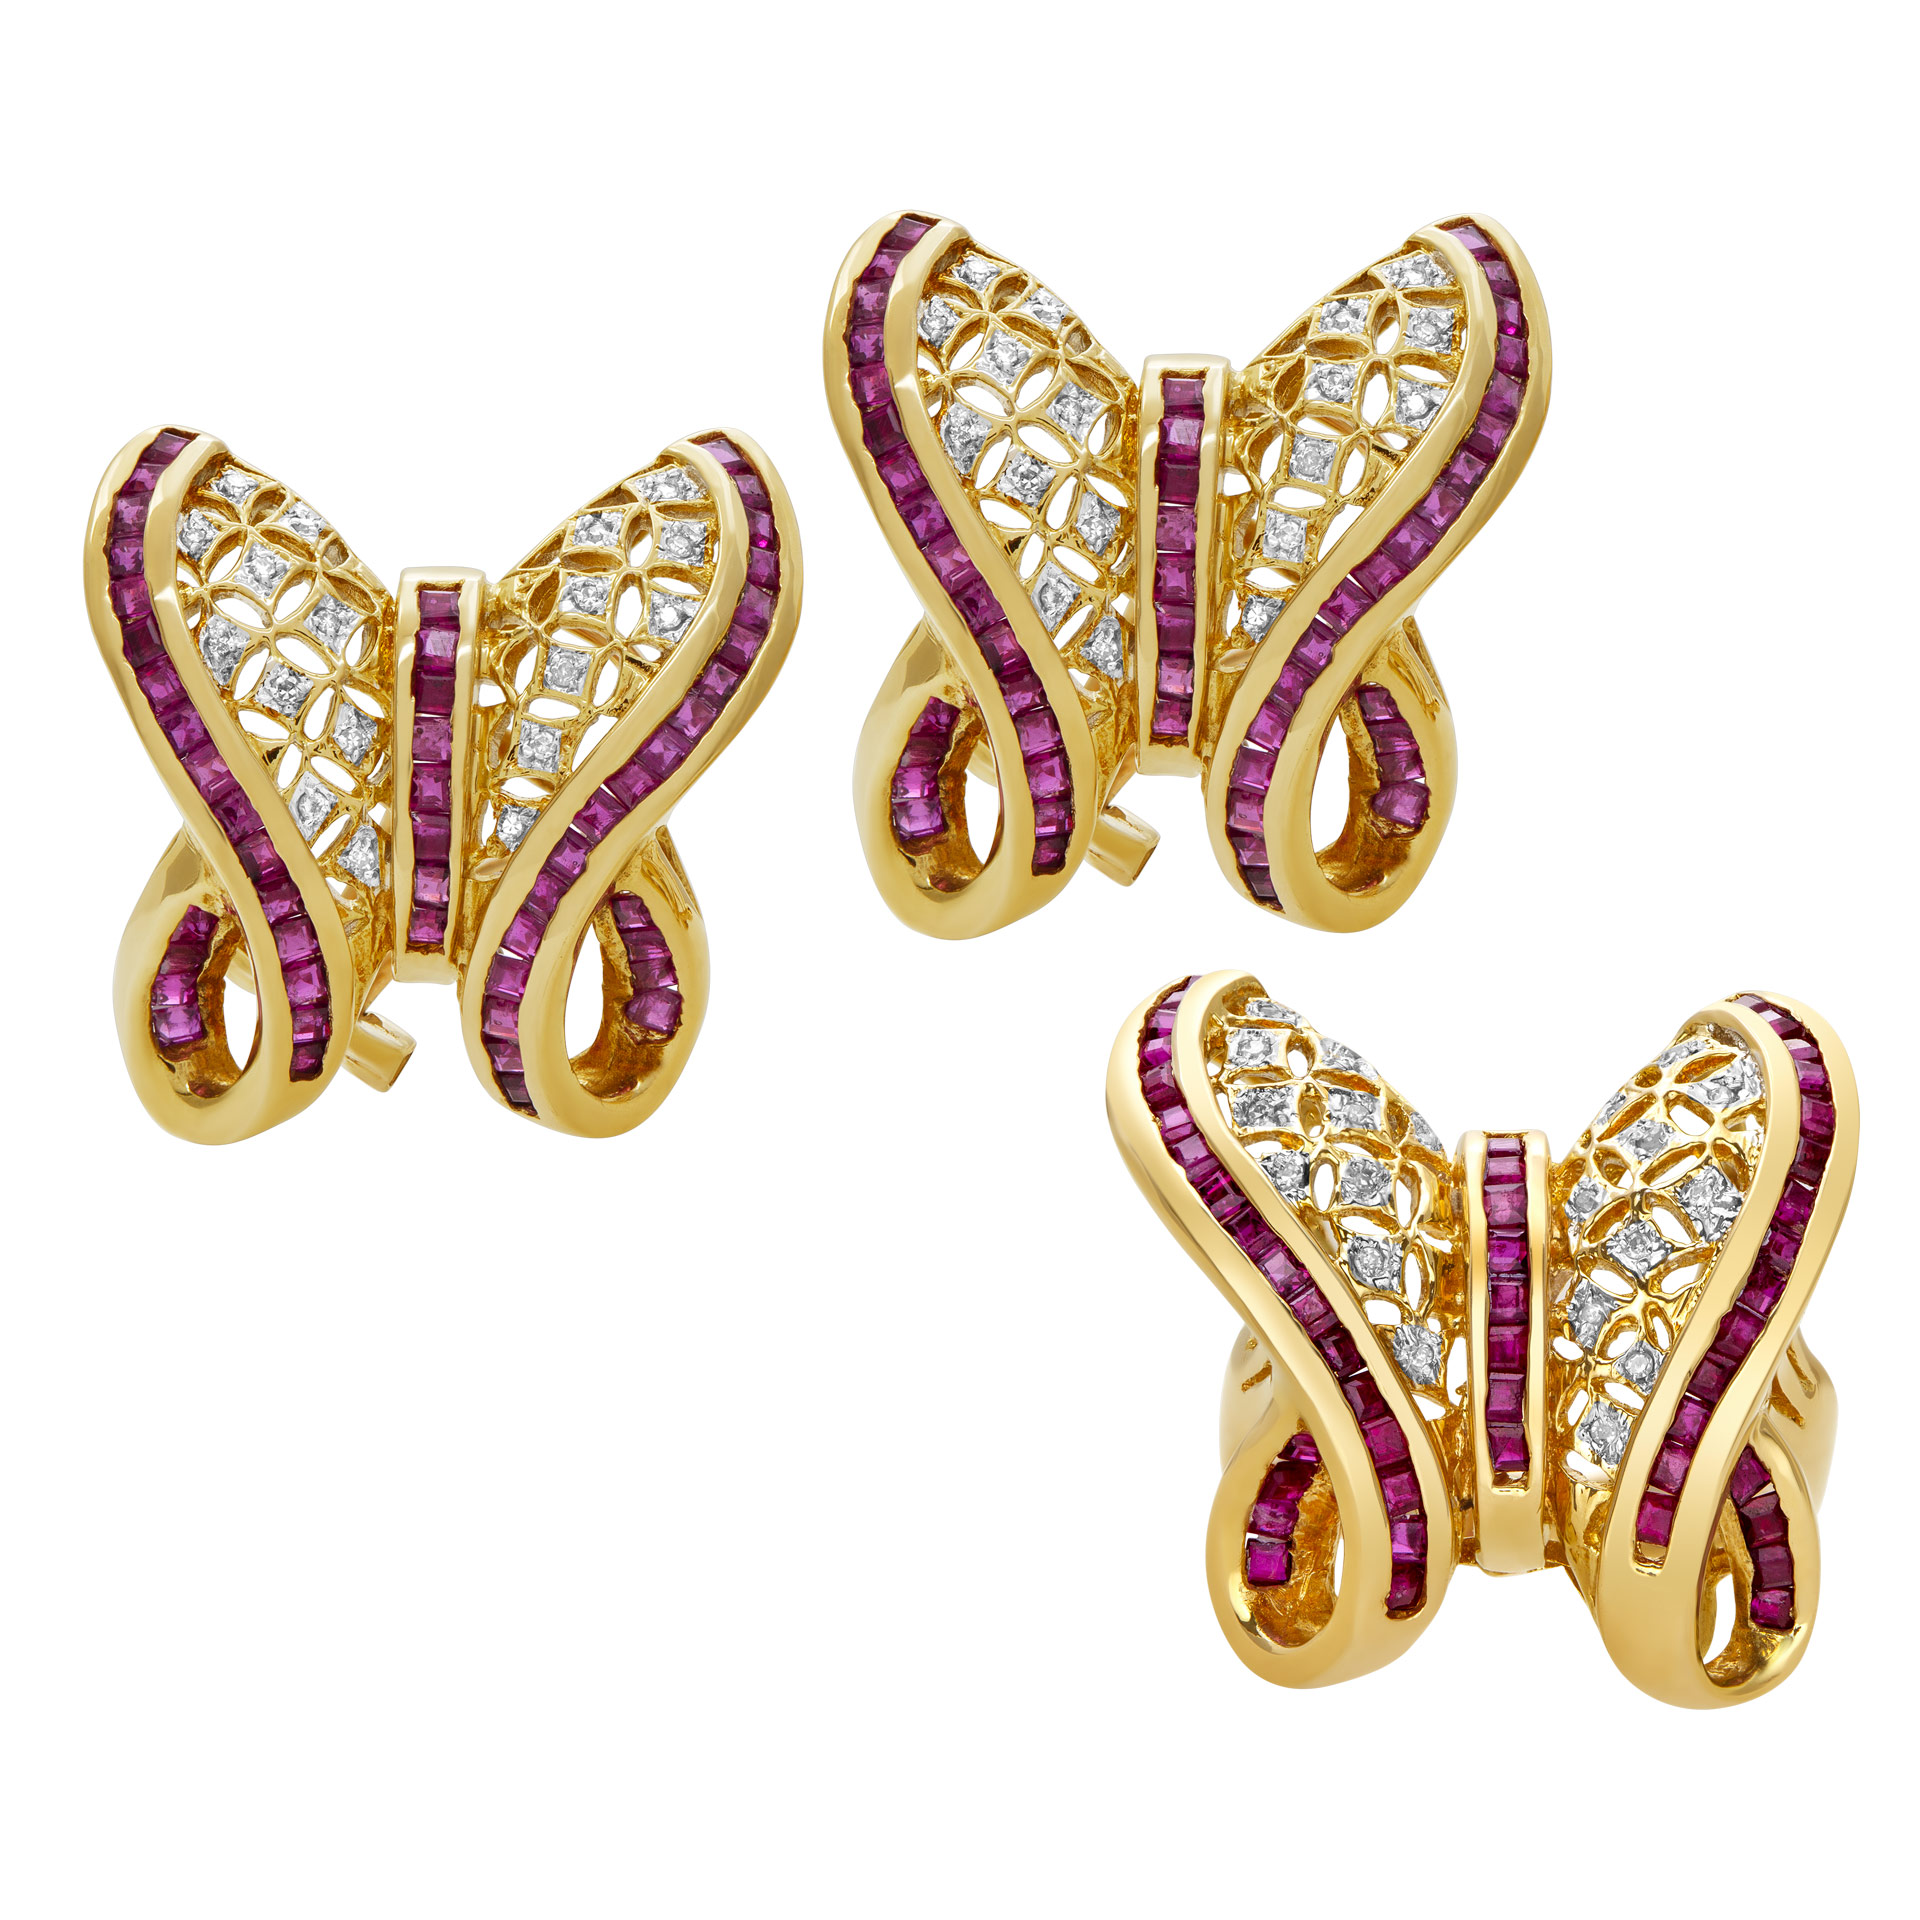 Butterfly Diamond and ruby Earring and Ring Set 14k yellow gold.